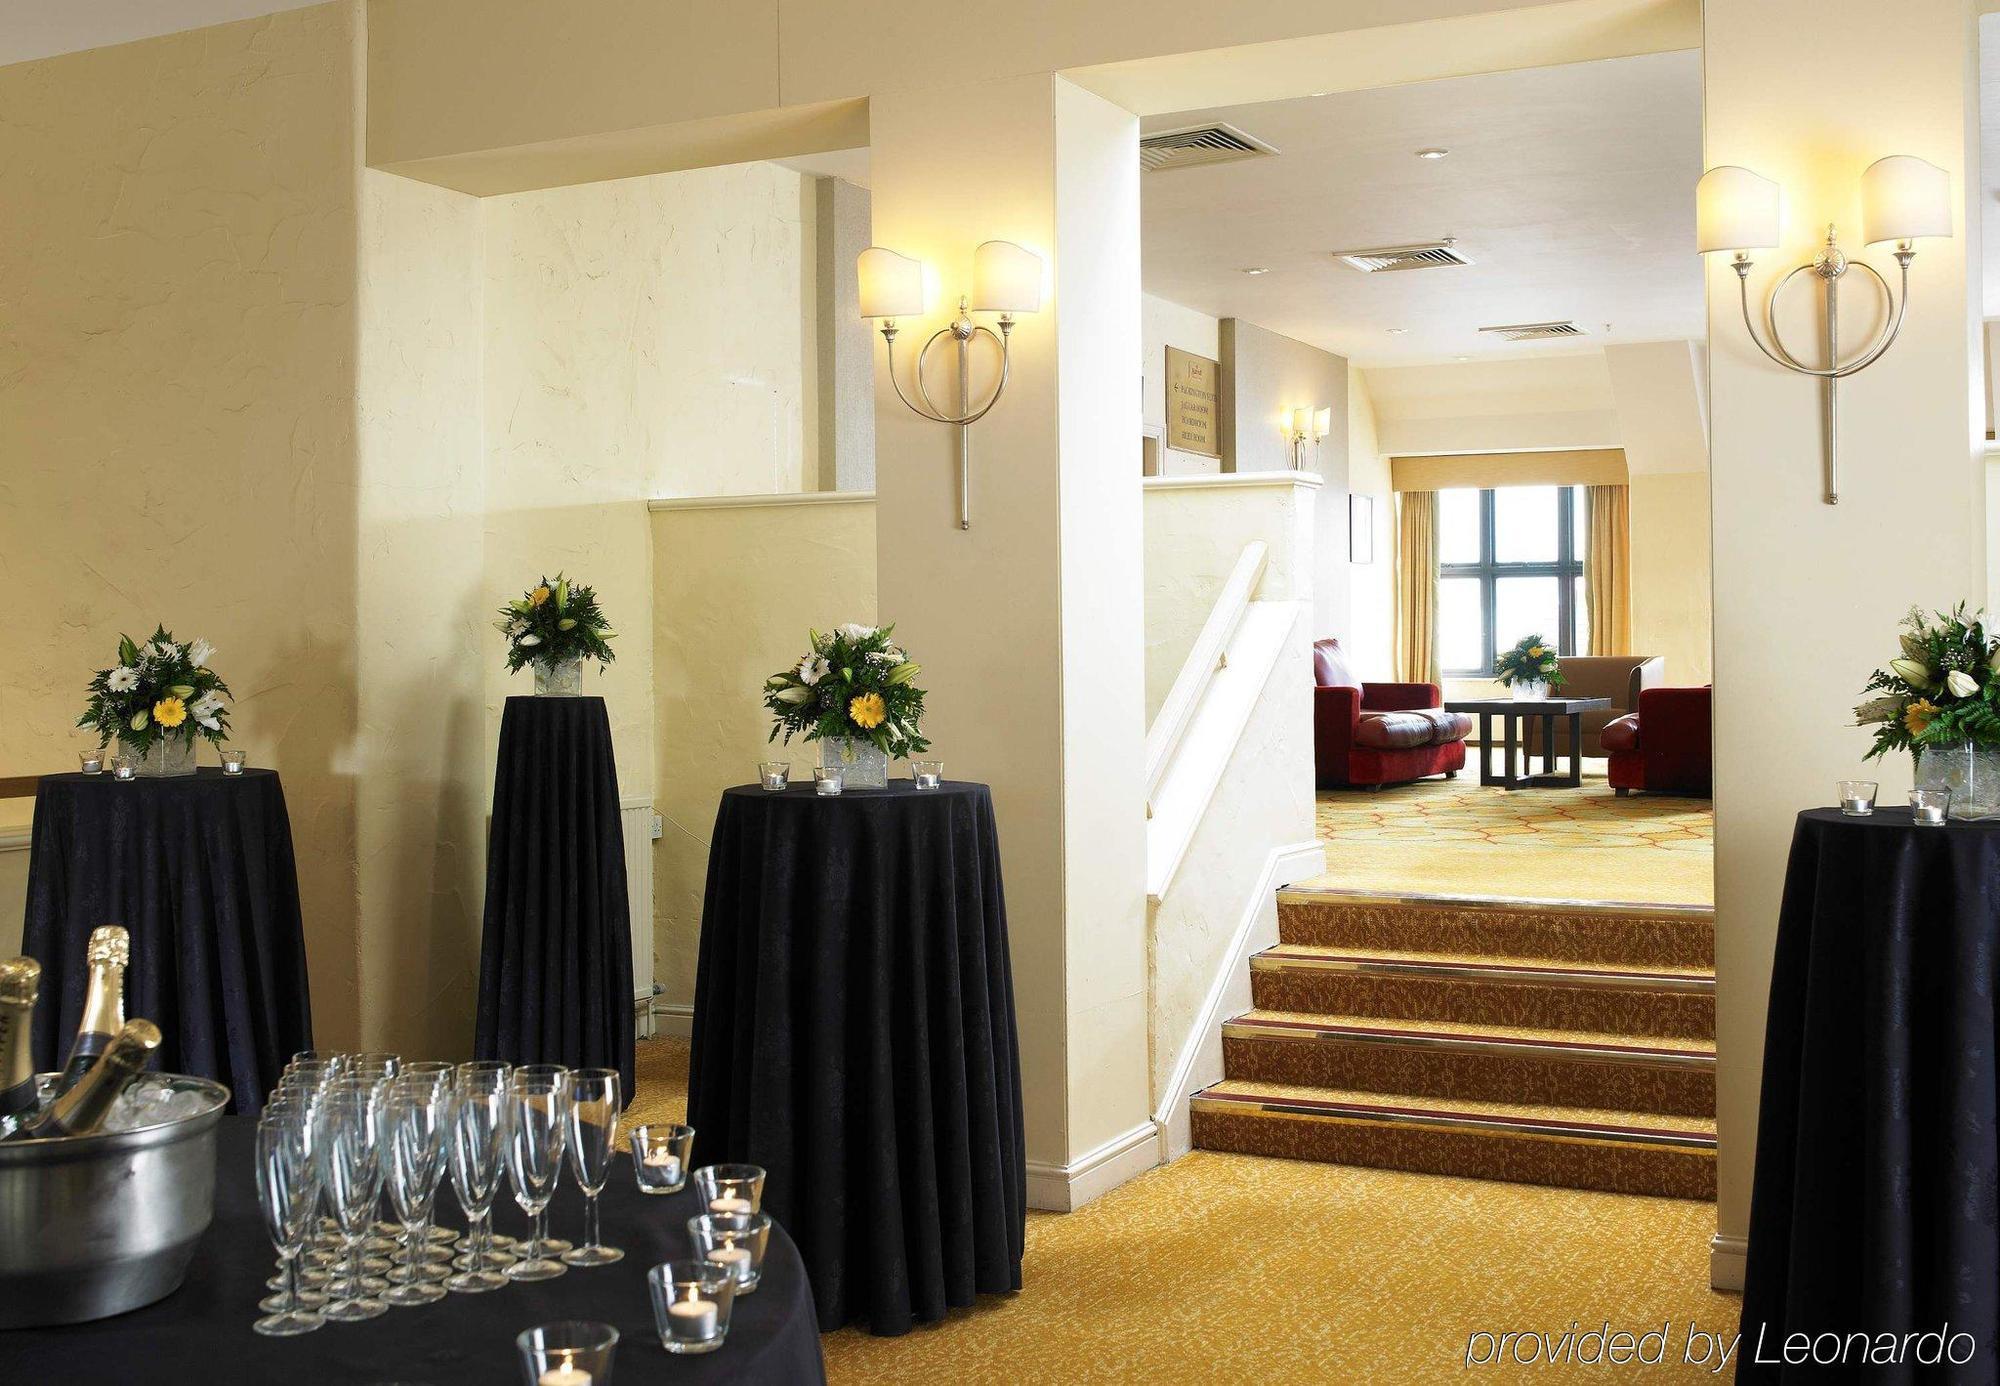 Forest Of Arden Hotel And Country Club Birmingham Restaurant photo